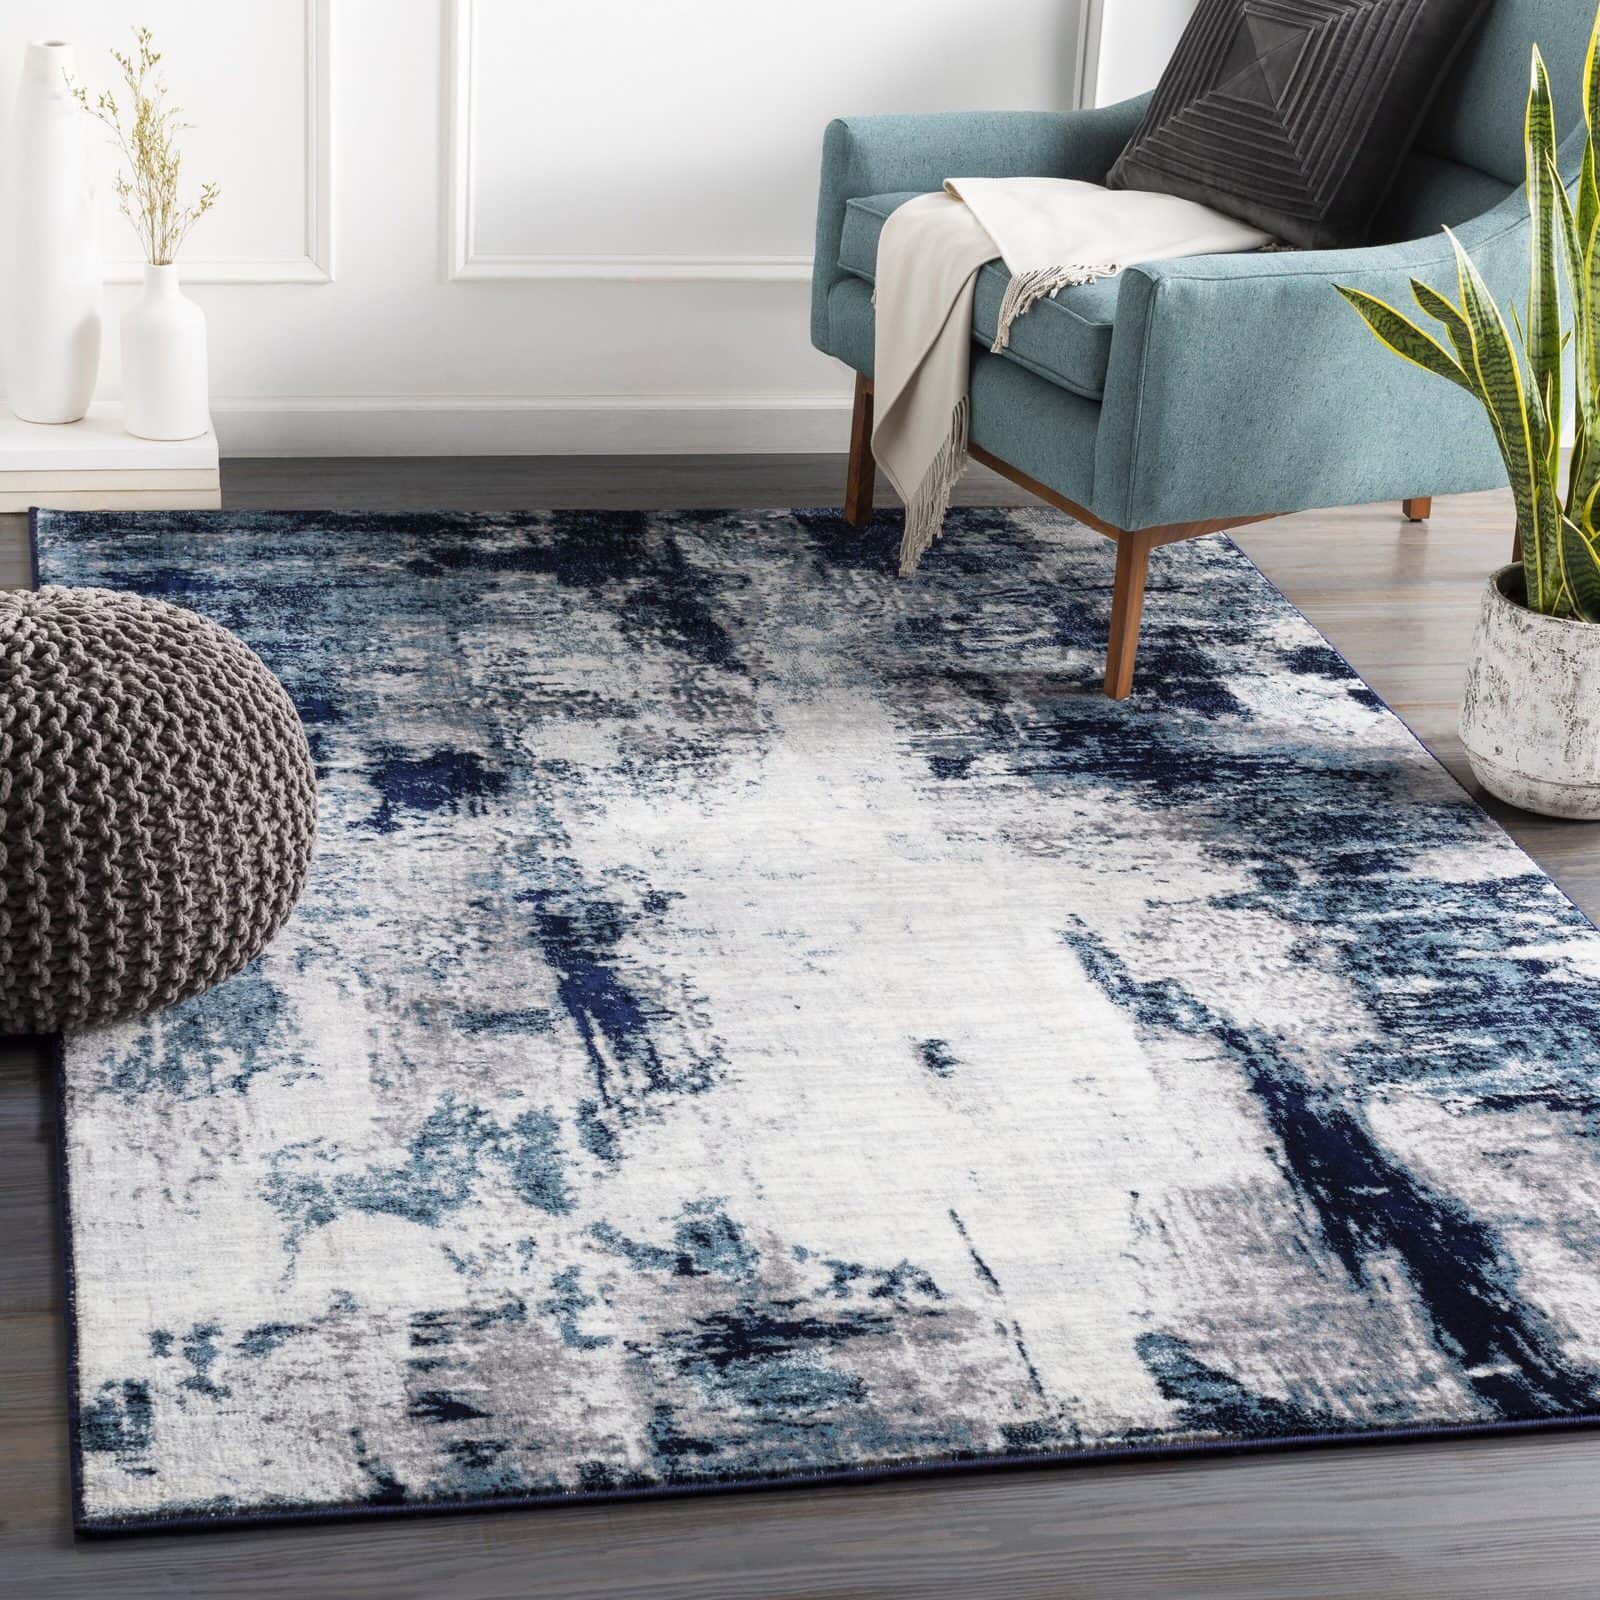 12 Best Navy Blue And White Rugs, Grey And White Rugs For Living Room